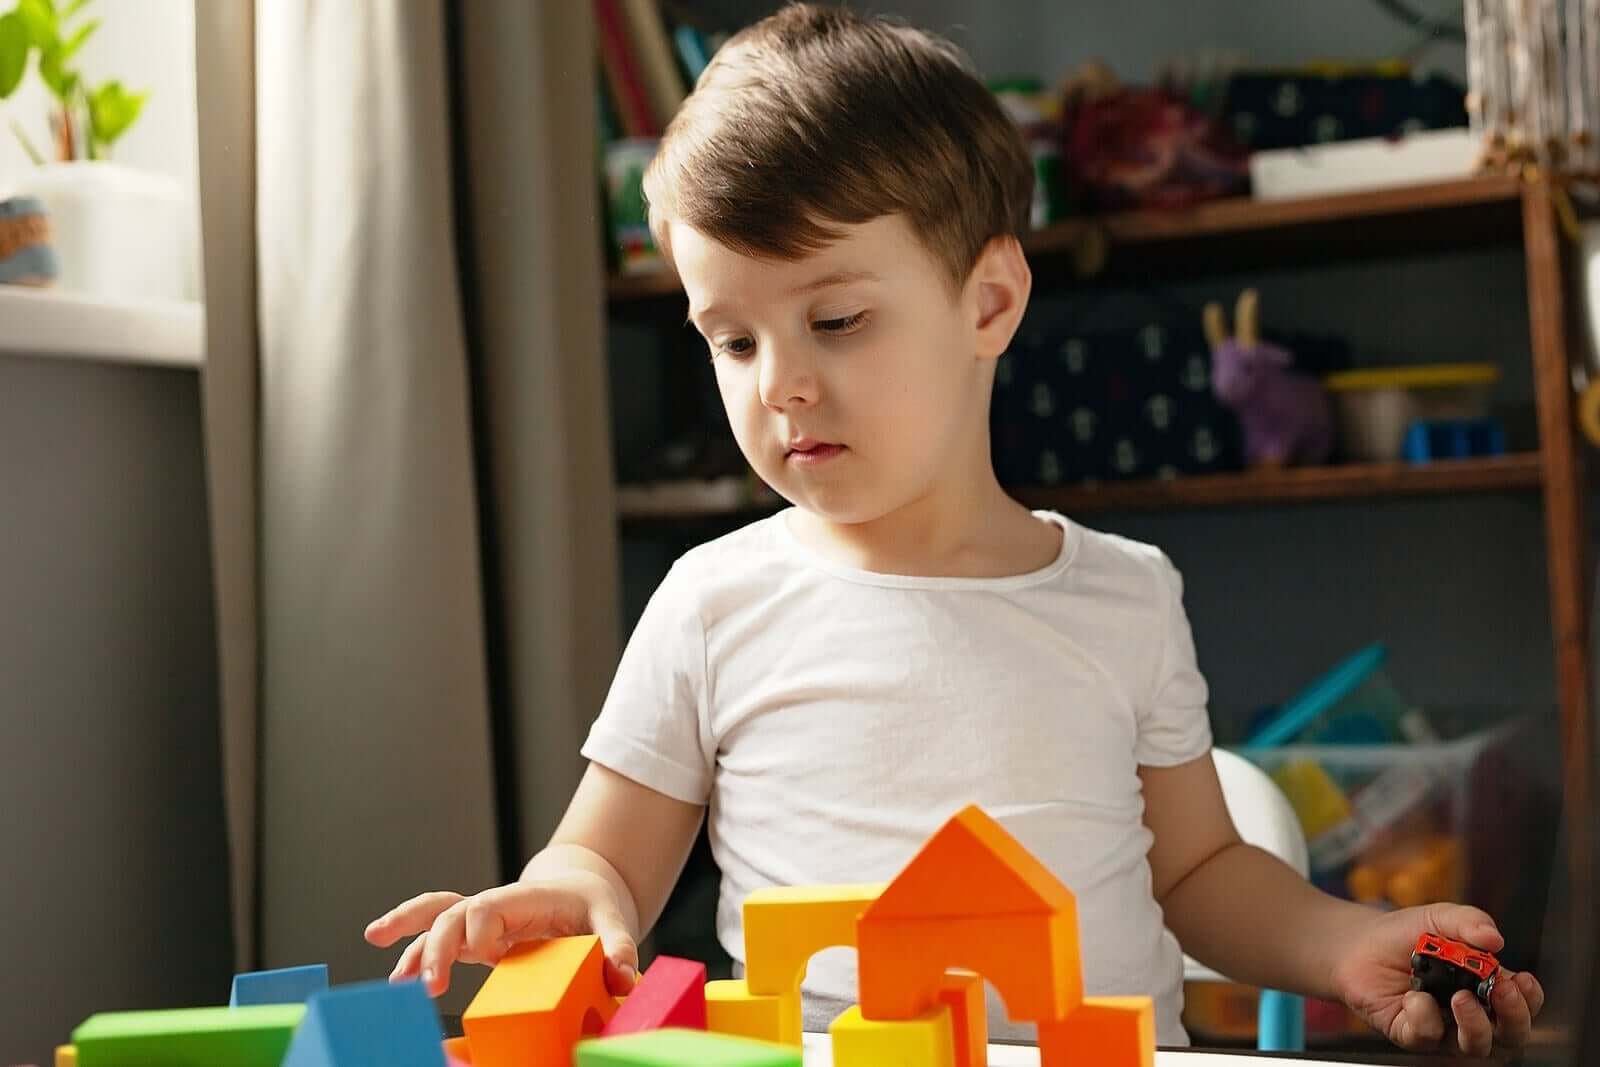 A child playing with building blocks.